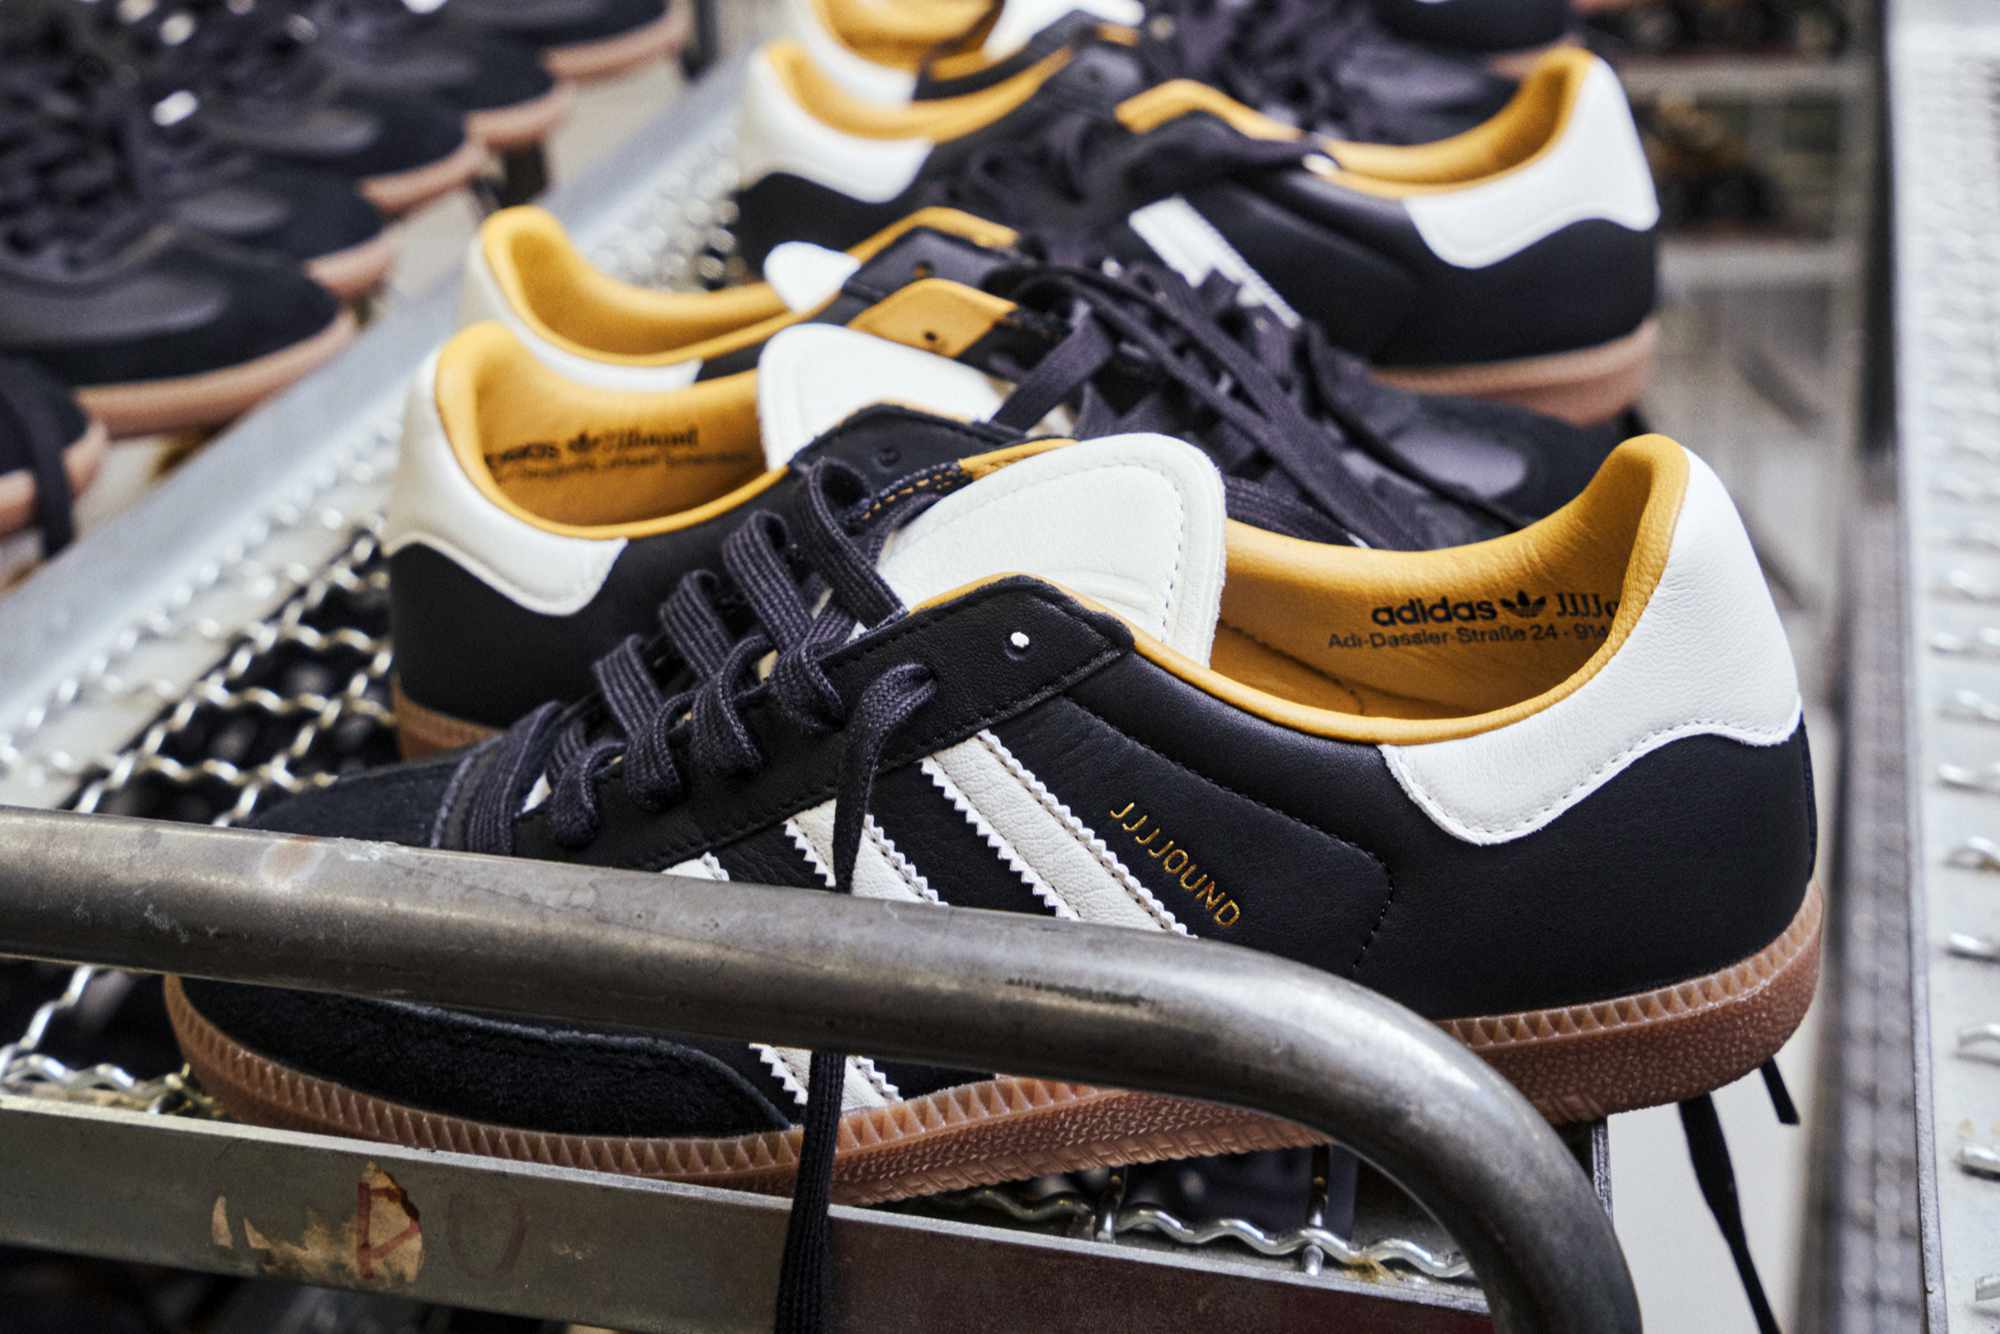 History of the adidas brand